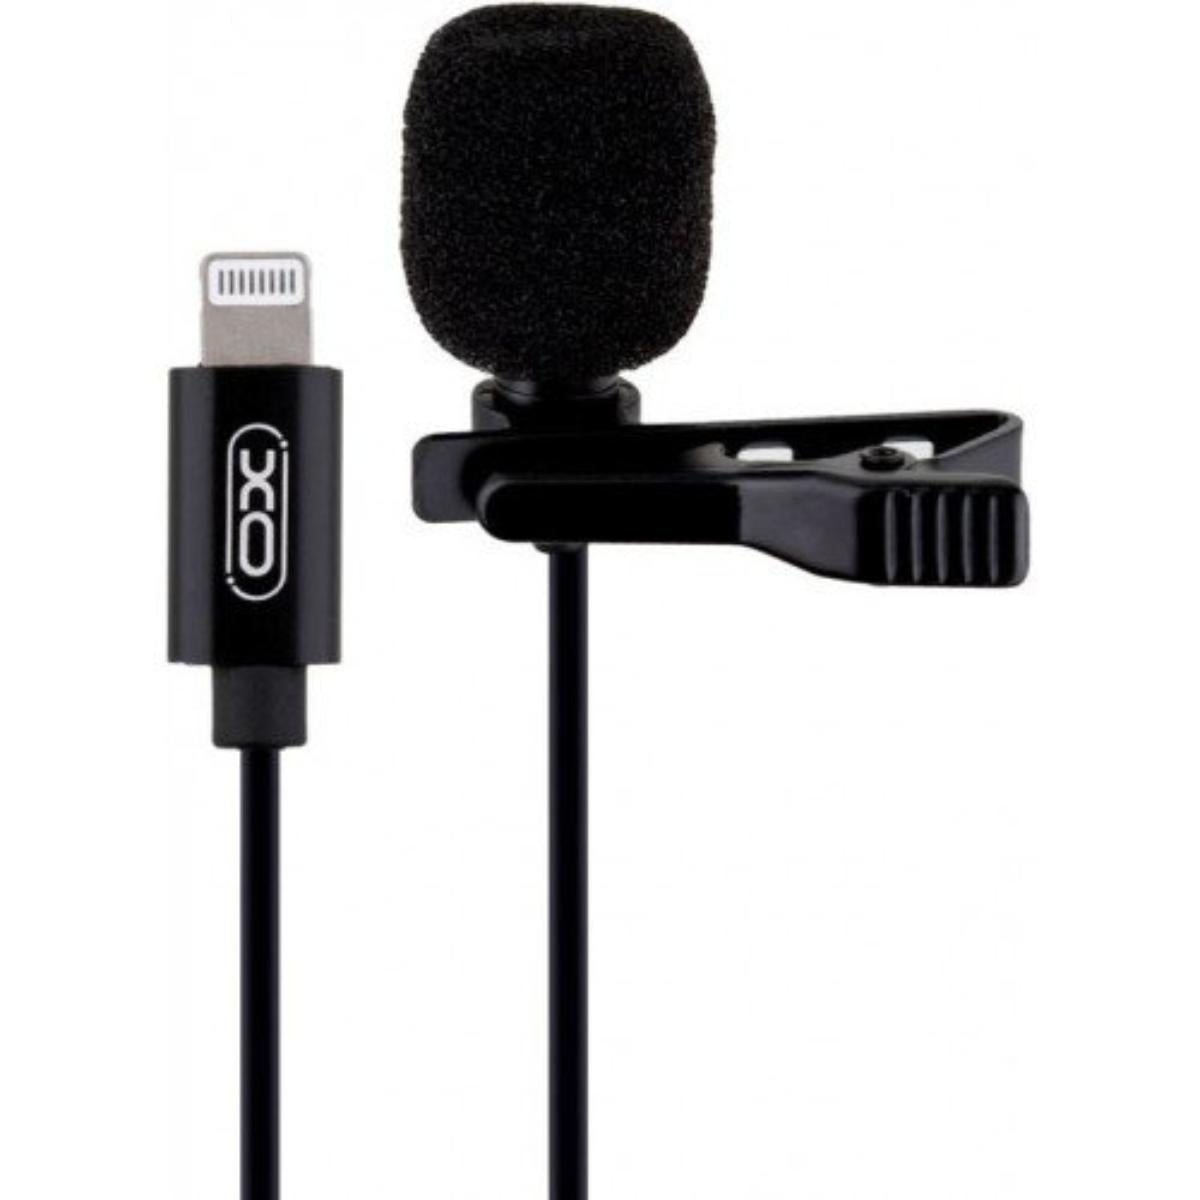 XO-MKF 03/AGTC Lavalier Microphone iPhone Microphone / Black / wired